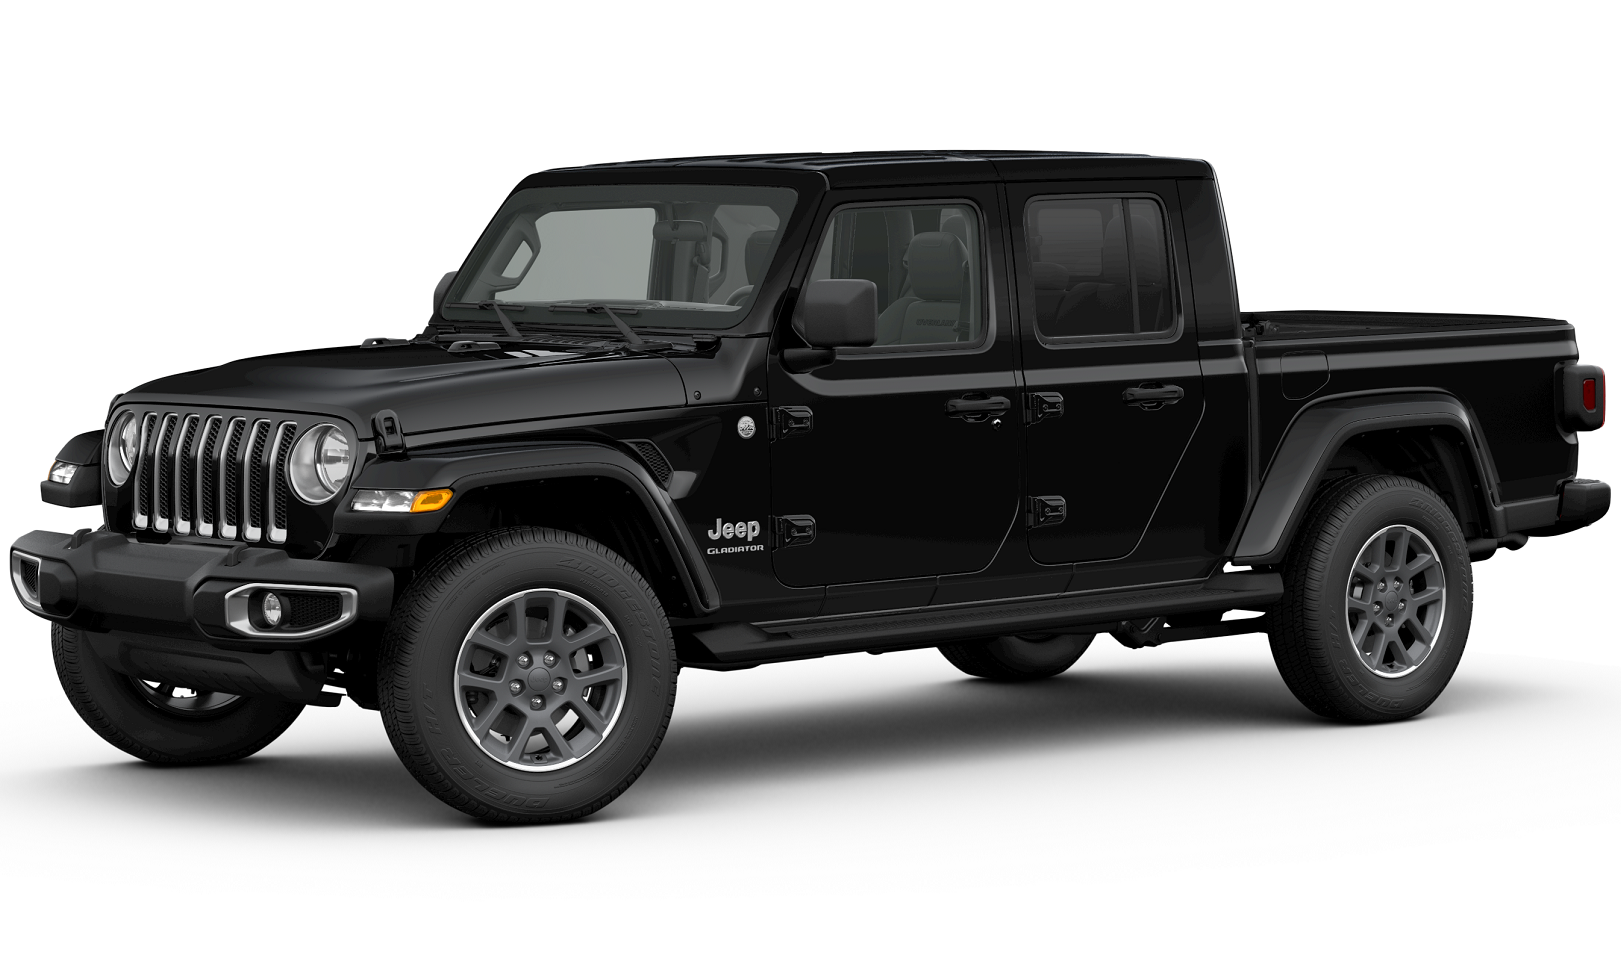 2020 Jeep Gladiator with Hard Top